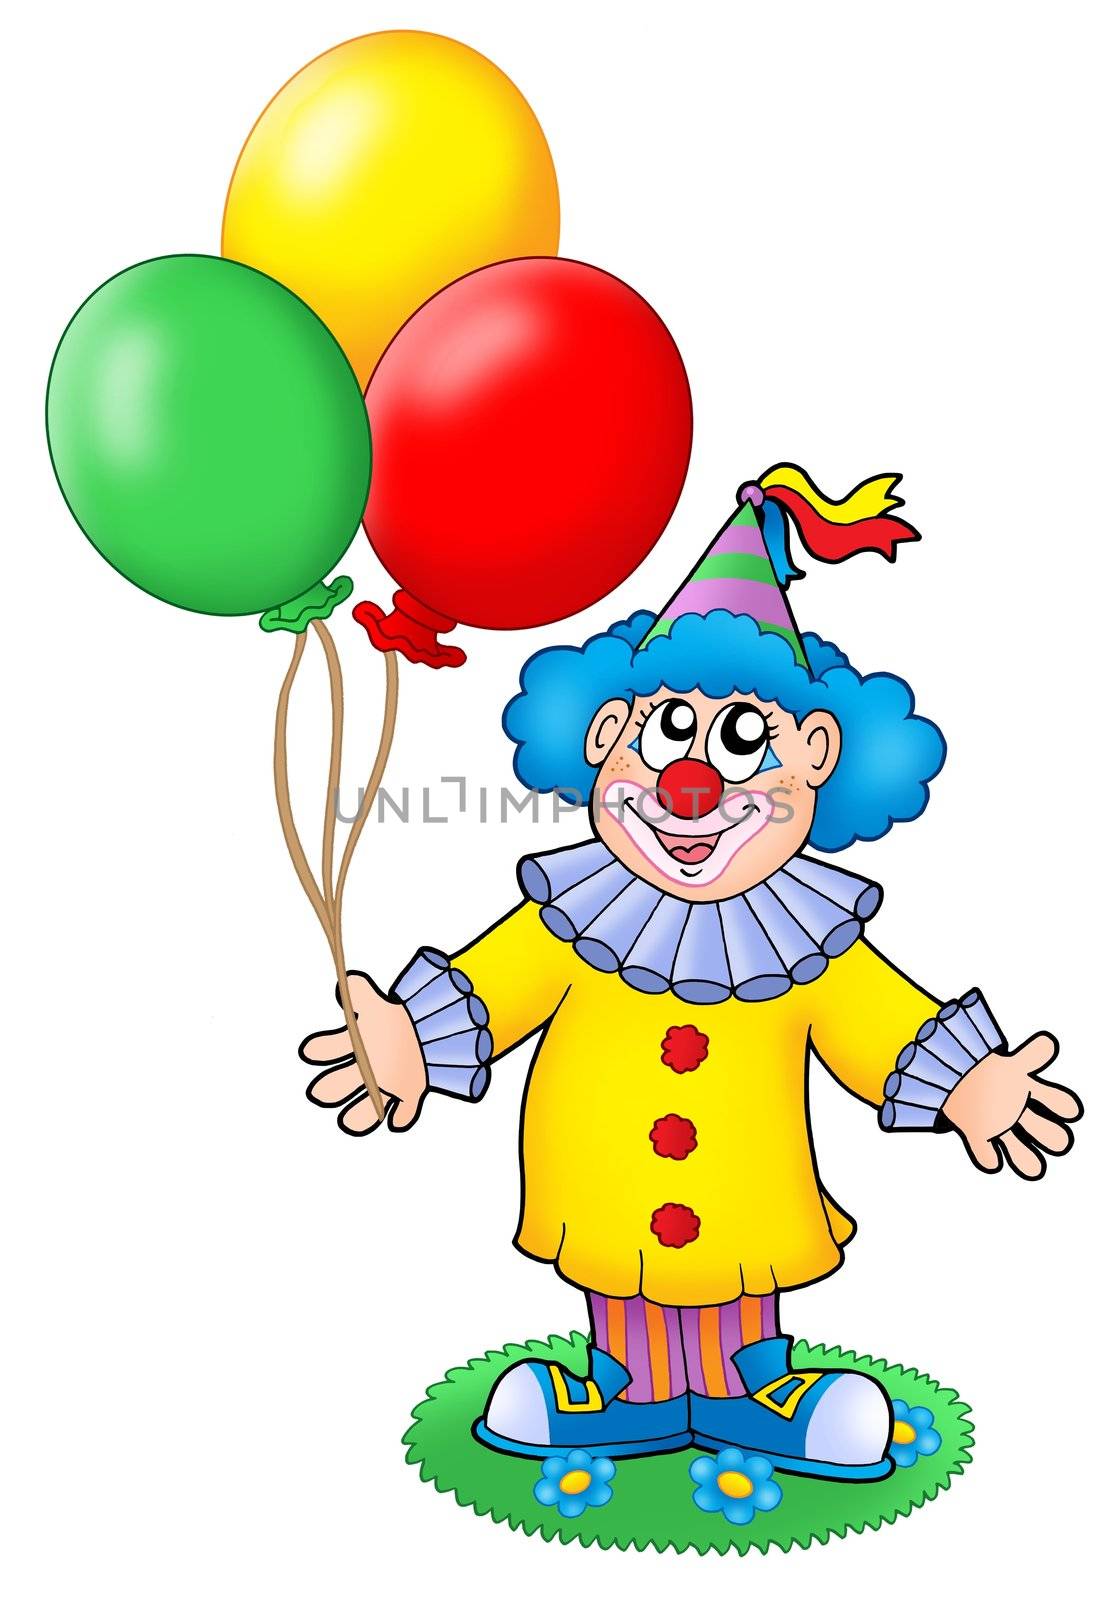 Cute clown with balloons by clairev